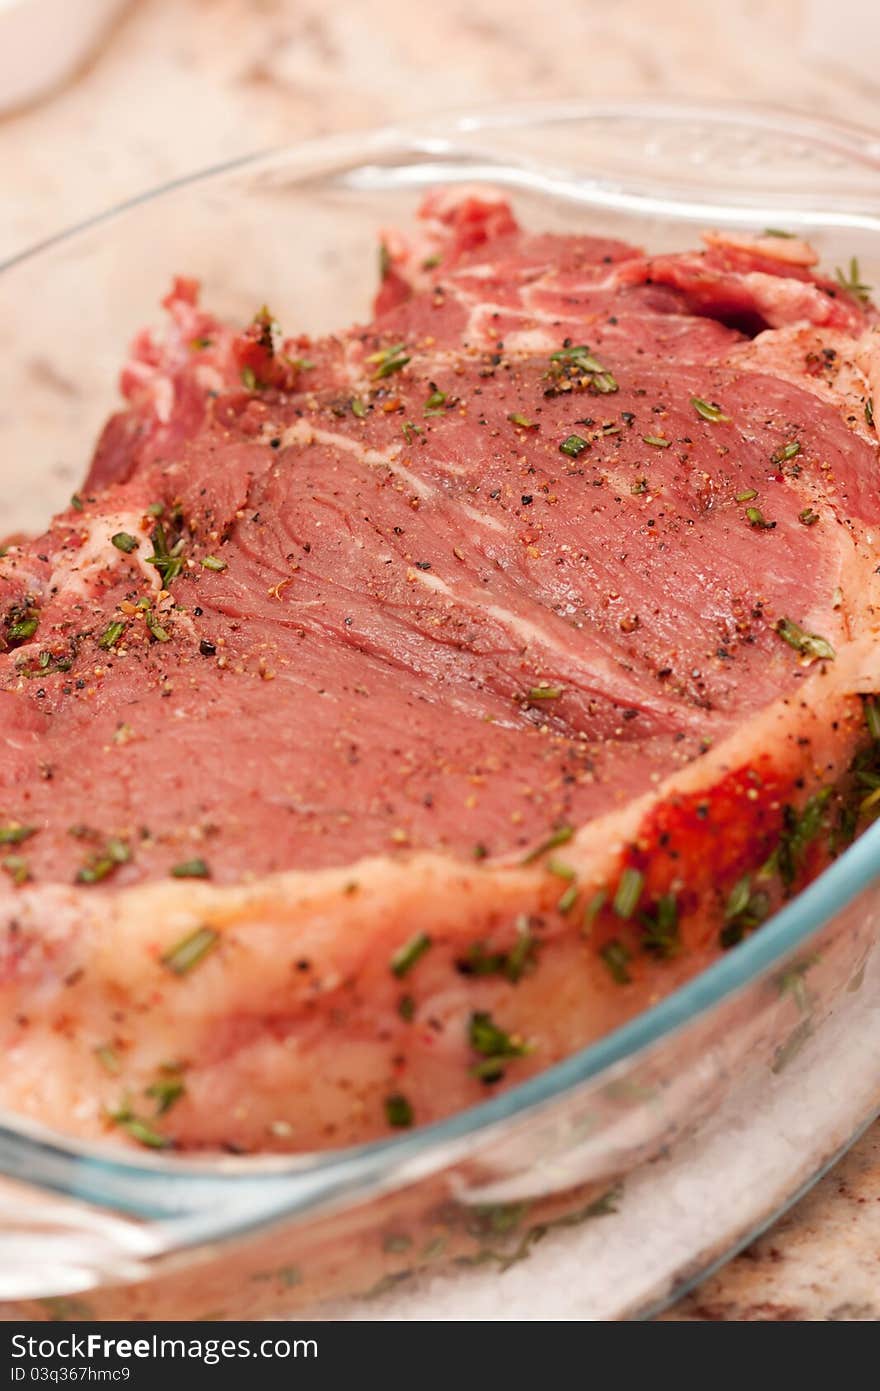 Delicious prime rib marinated with herbs and spices ready to be cooked. Delicious prime rib marinated with herbs and spices ready to be cooked